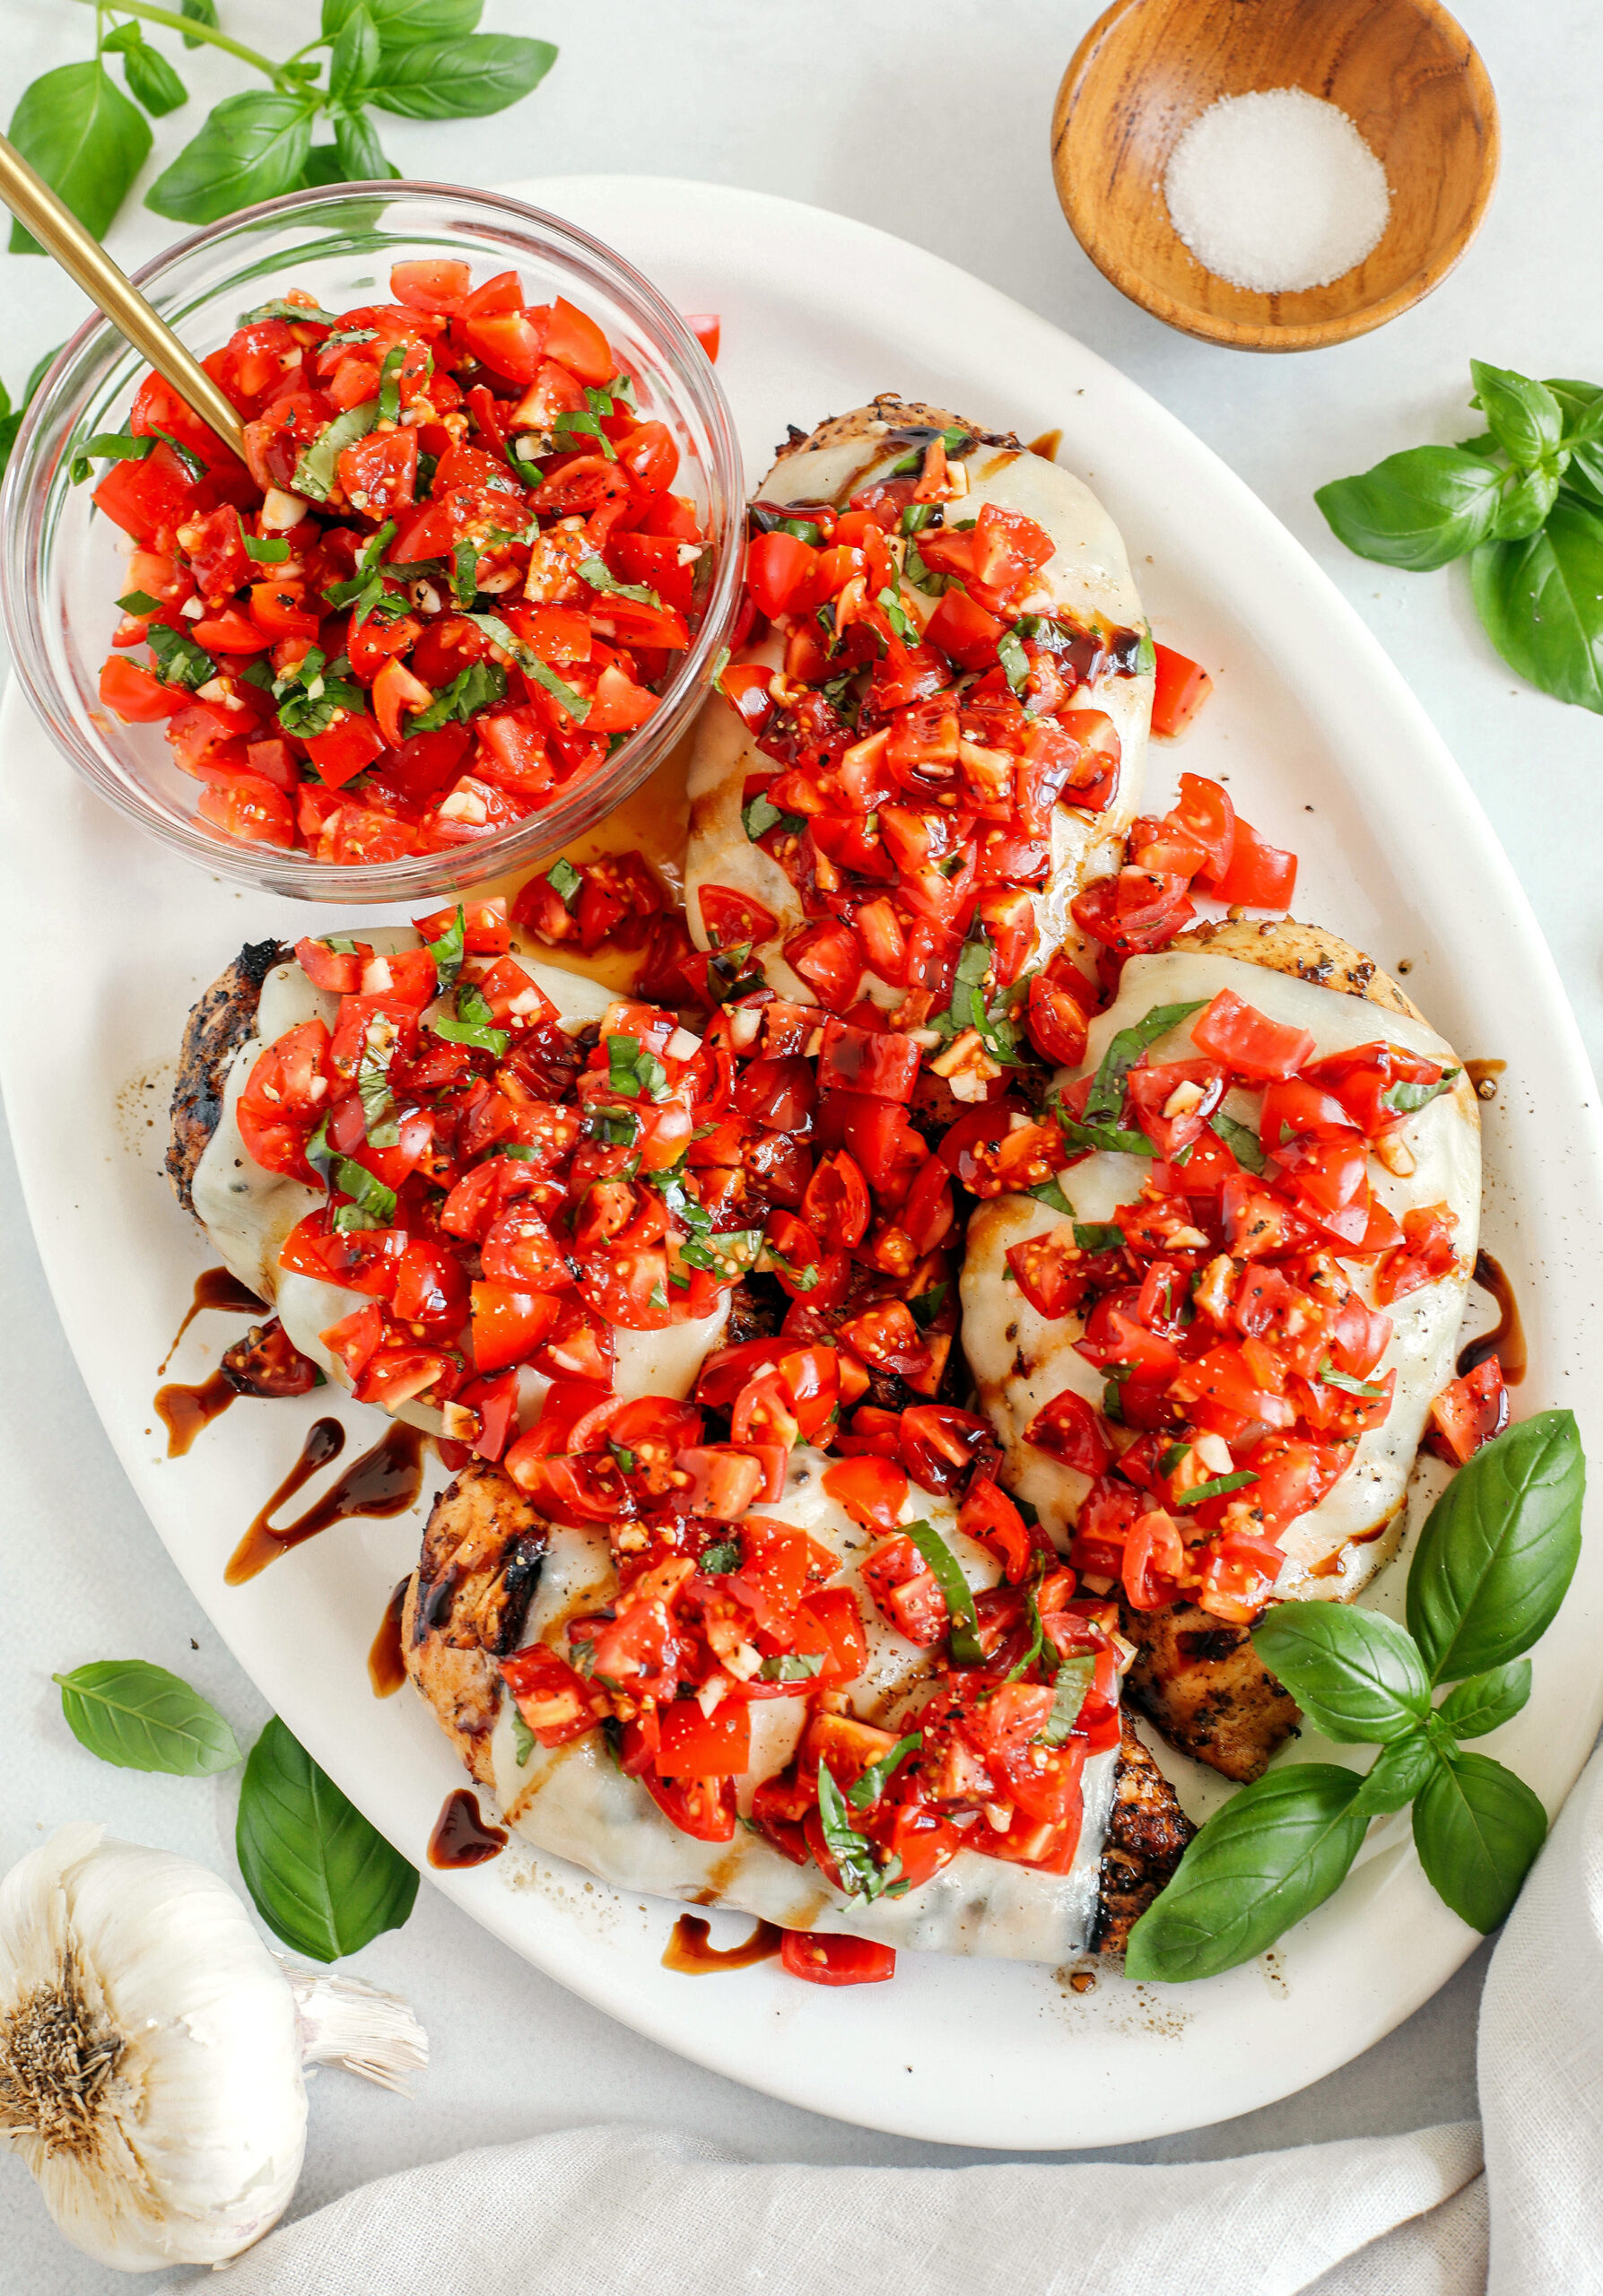 This Grilled Bruschetta Chicken is super easy to make and marinated in the most delicious lemon balsamic dressing all topped with melty mozzarella cheese and fresh tomato bruschetta for the perfect summer meal!